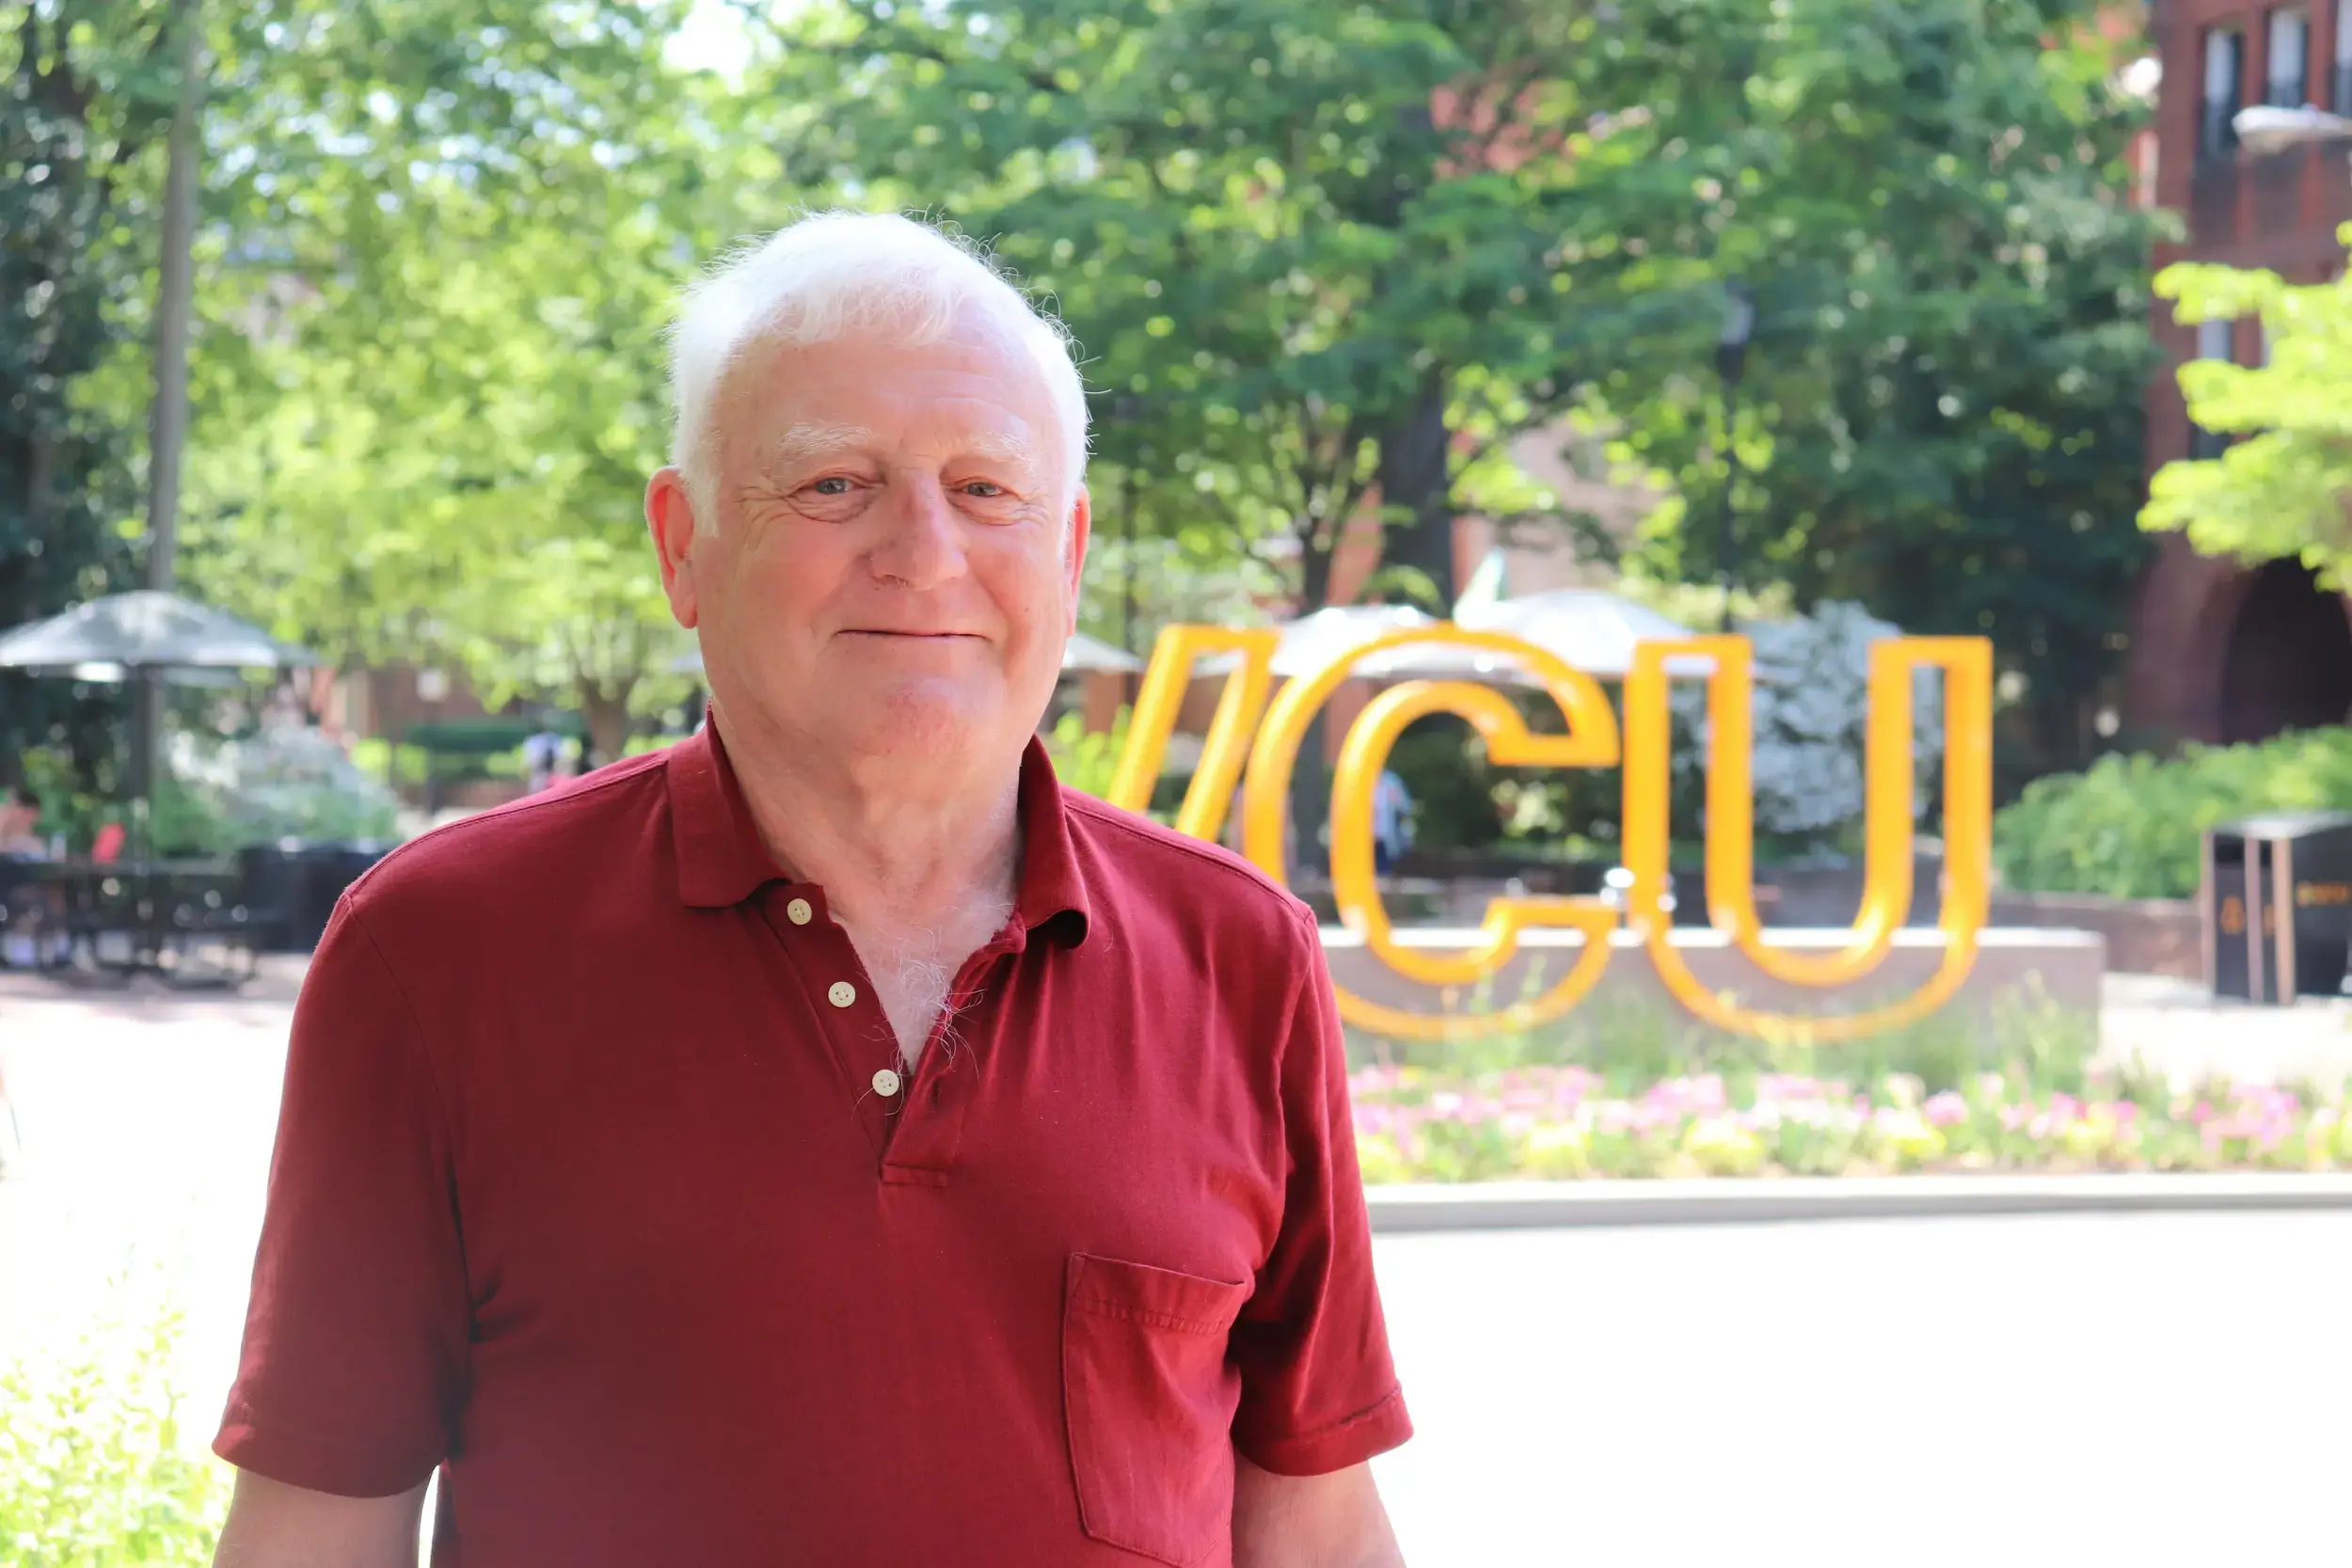 Nick Farrell in front of VCU sign